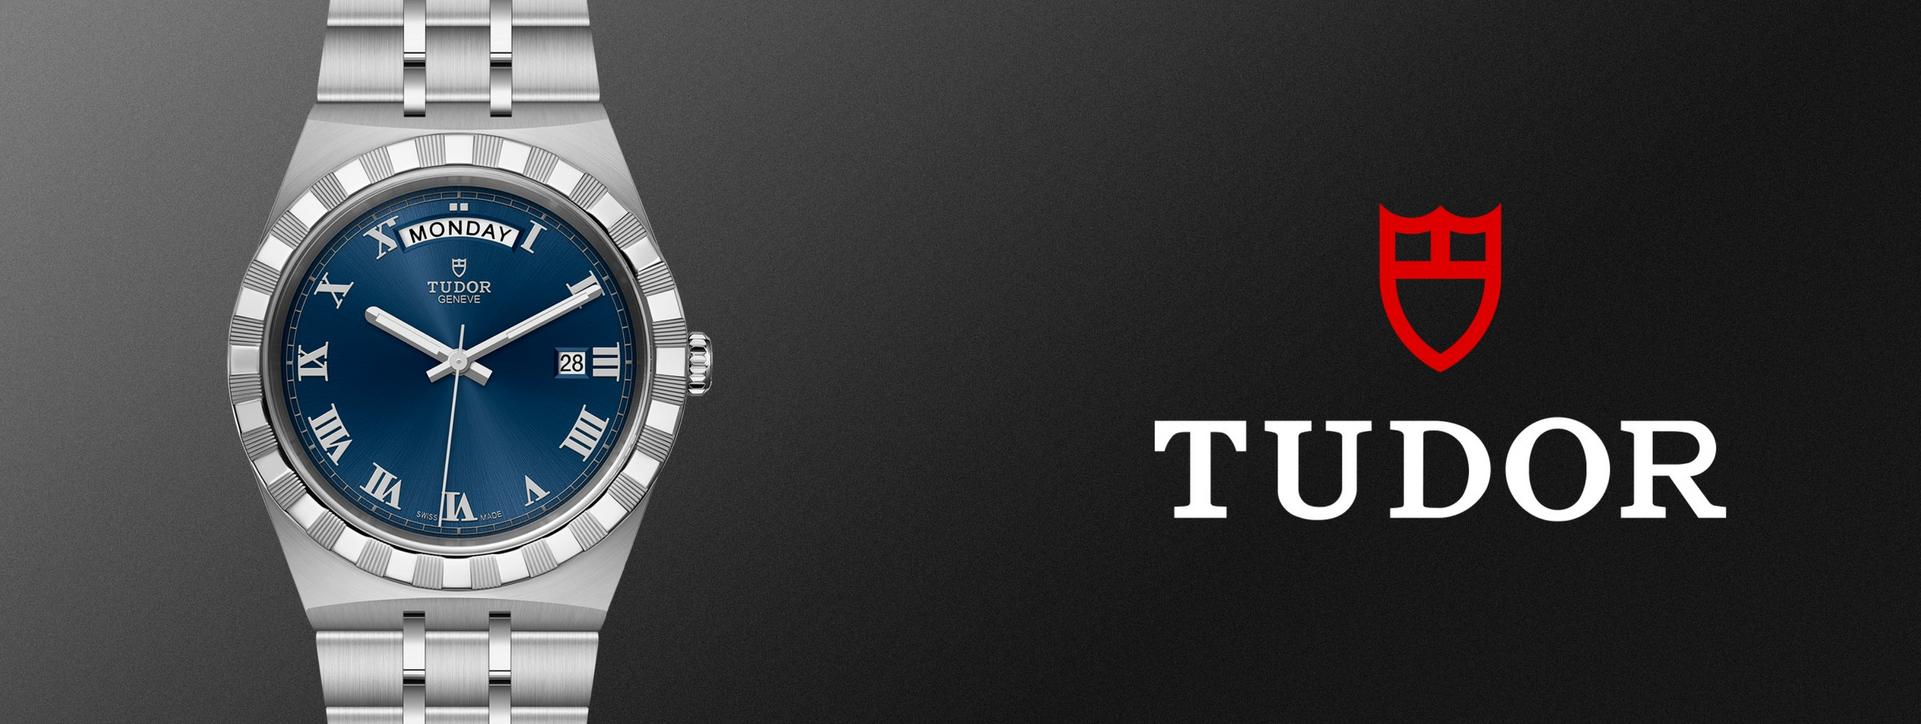 Tudor - Finest Swiss Watchmaking - Official Timekeepers of the 2019 Rugby World Cup